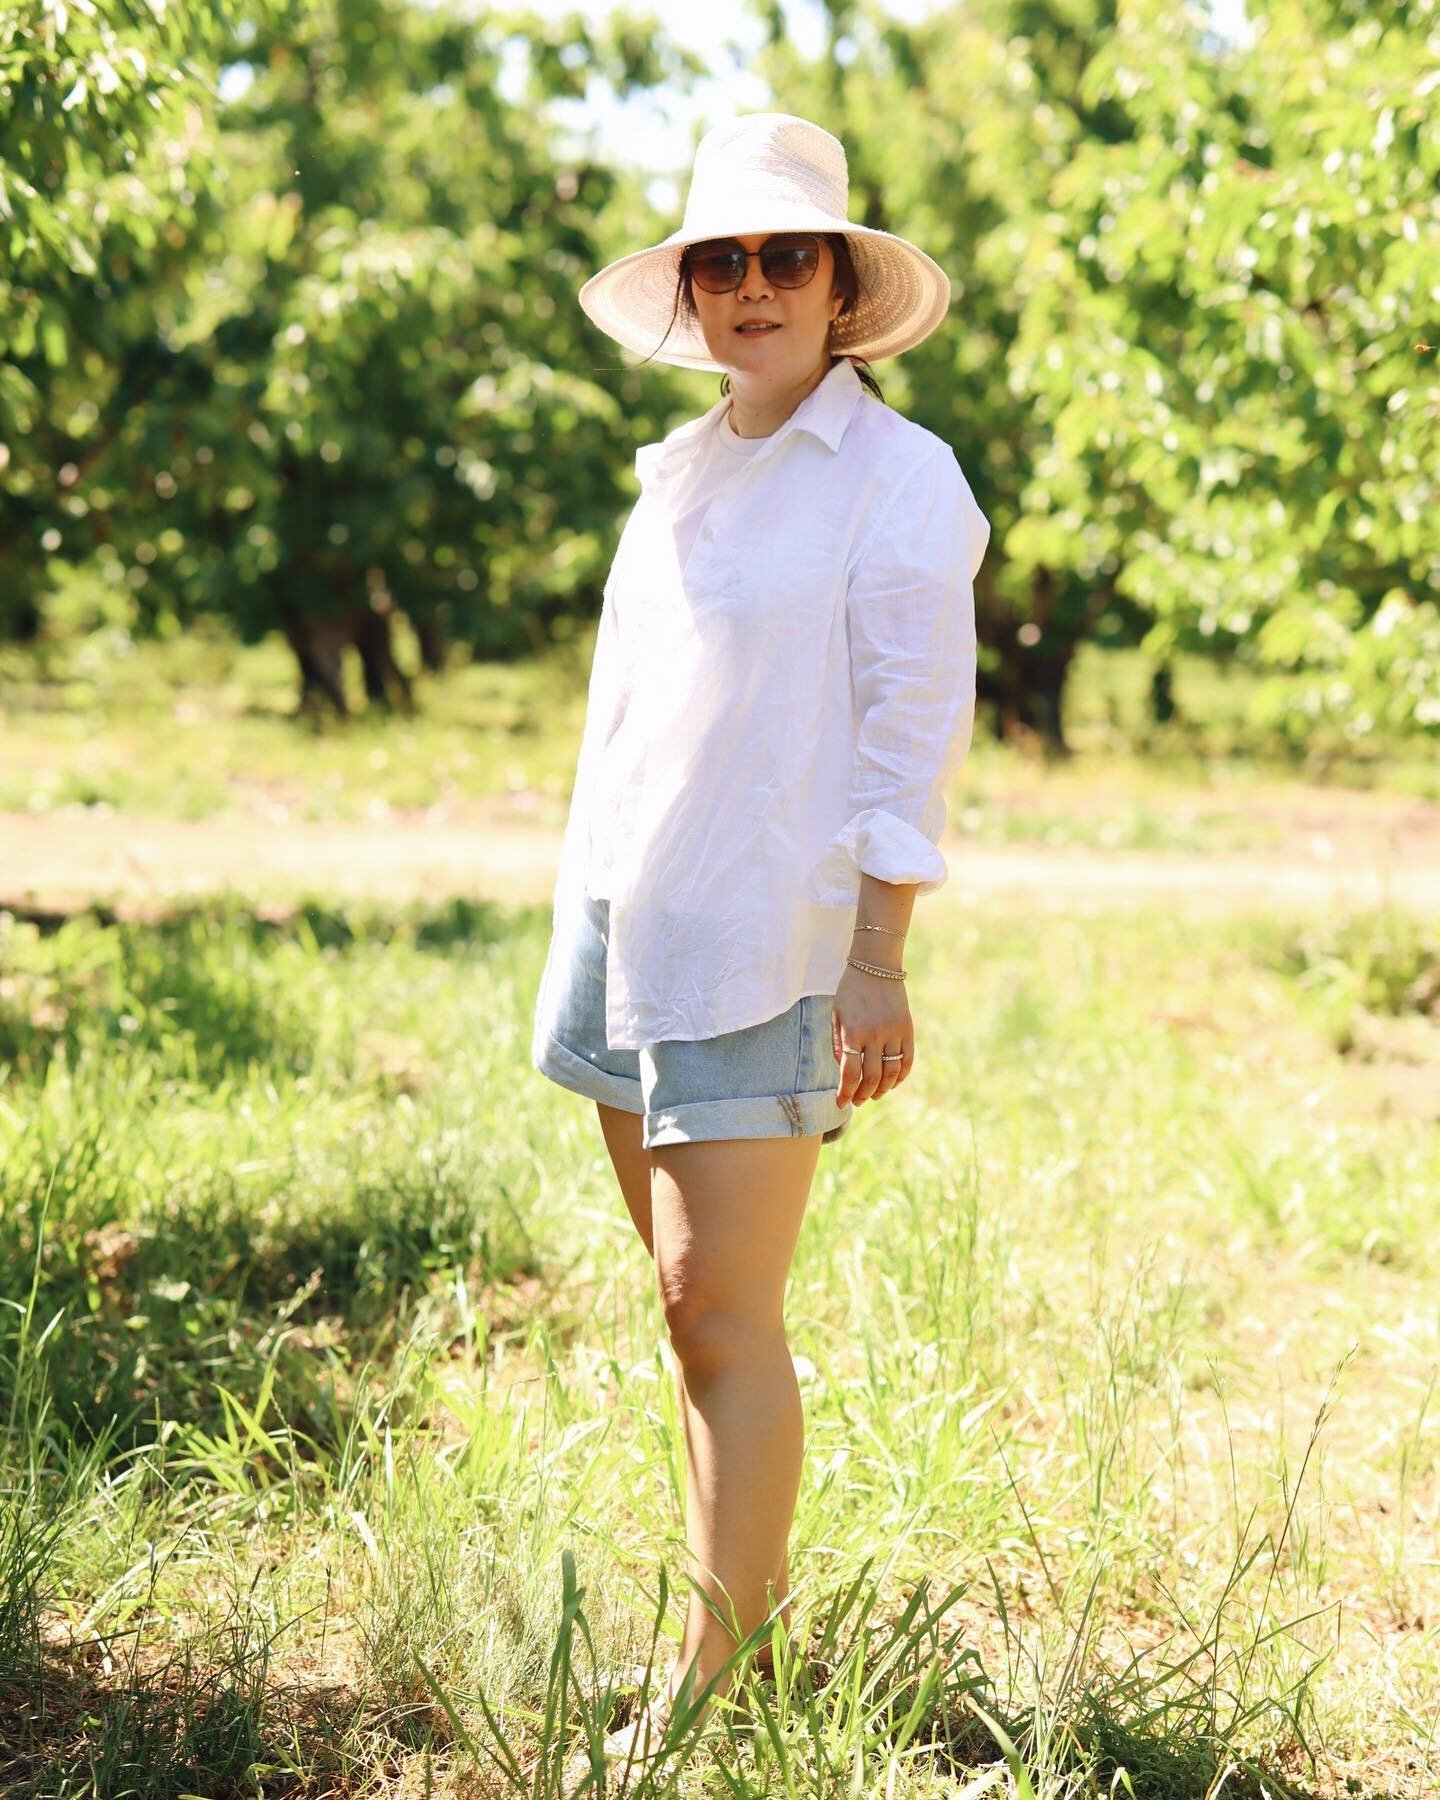 #ootd at the orchards. A very fun weekend 🍒 picking
&mdash;&mdash;&mdash;
Outfit details
Top: @onequince linen button down 
Shorts: old @everlane 
Hat: @ericjavits via @therealreal 
.
.
.

 #secondhandfashion #secondhandfirst  #slowfashion #fairfash